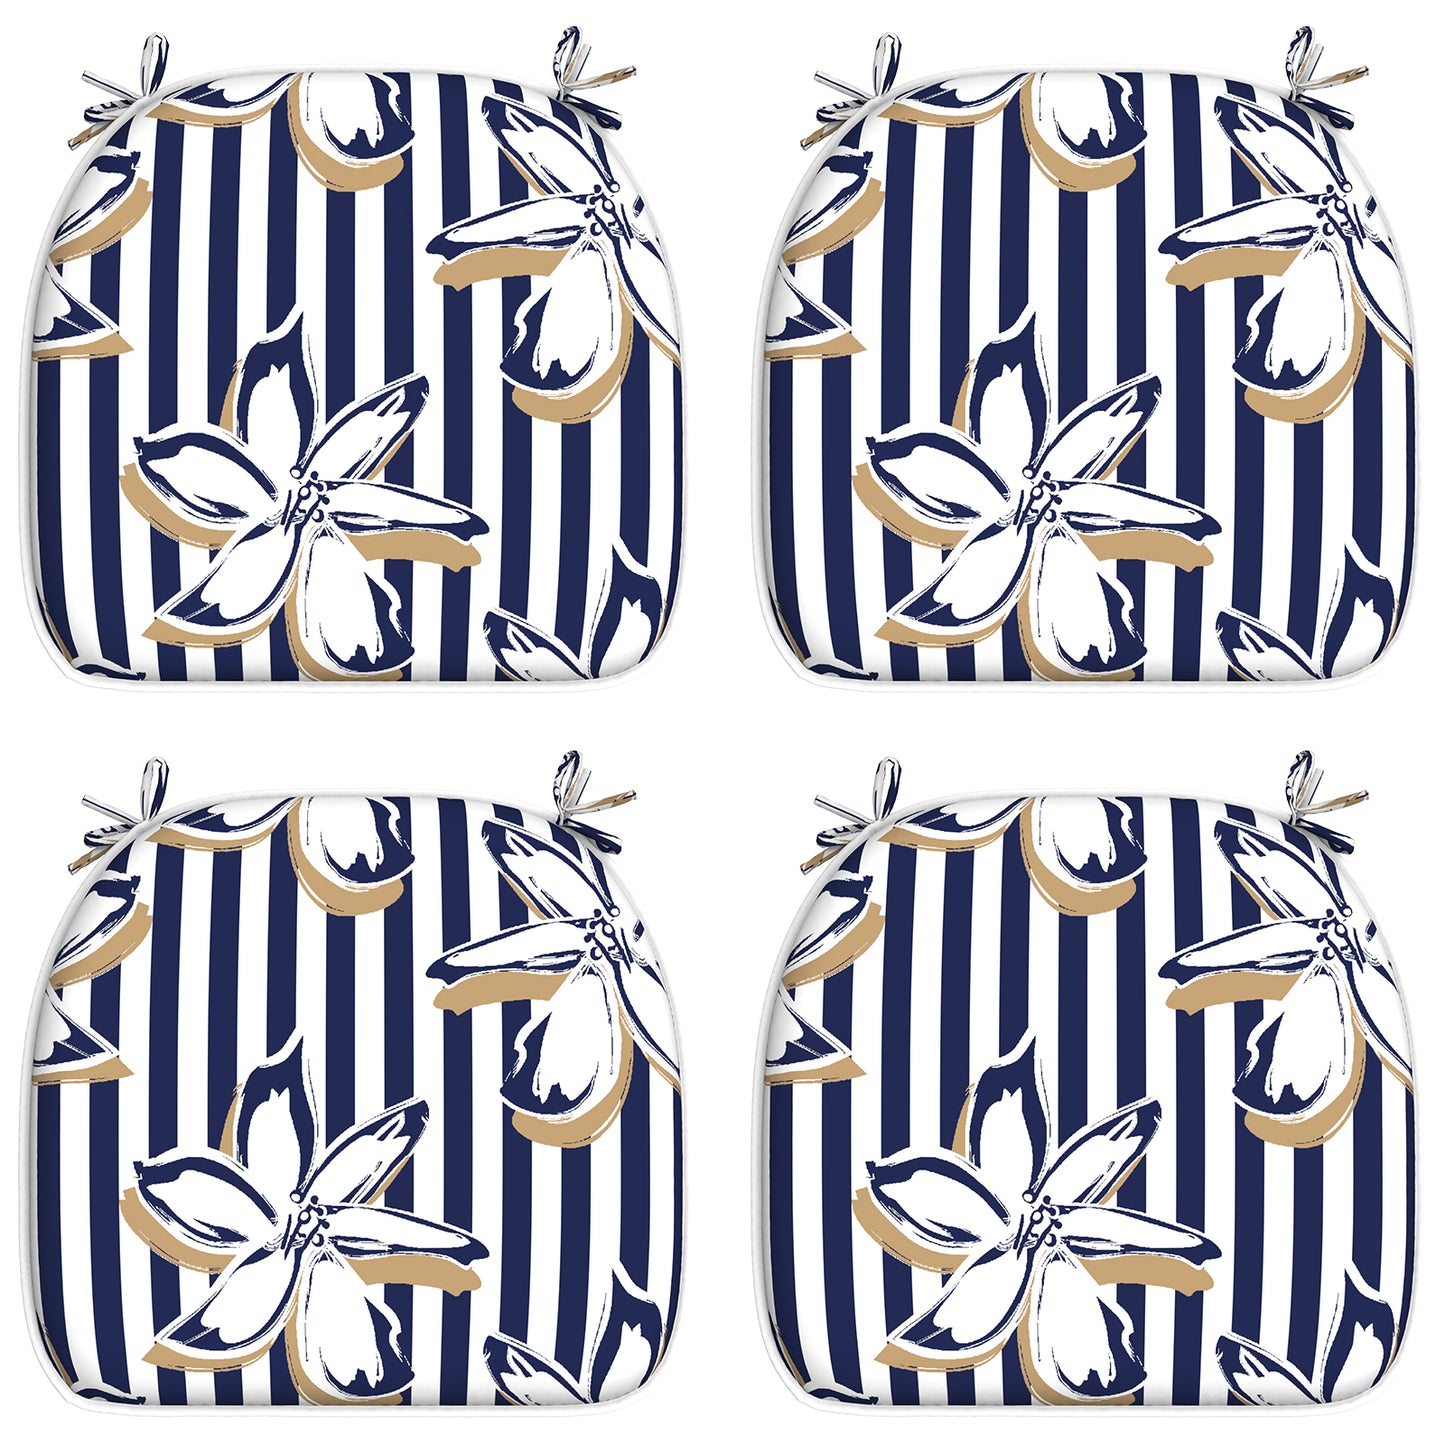 Melody Elephant Outdoor Chair Cushions Set of 4, Water Resistant Patio Chair Pads with Ties, Seat Cushions for Home Garden Furniture Decoration, 16”x17”,  Clemens Cabana Navy